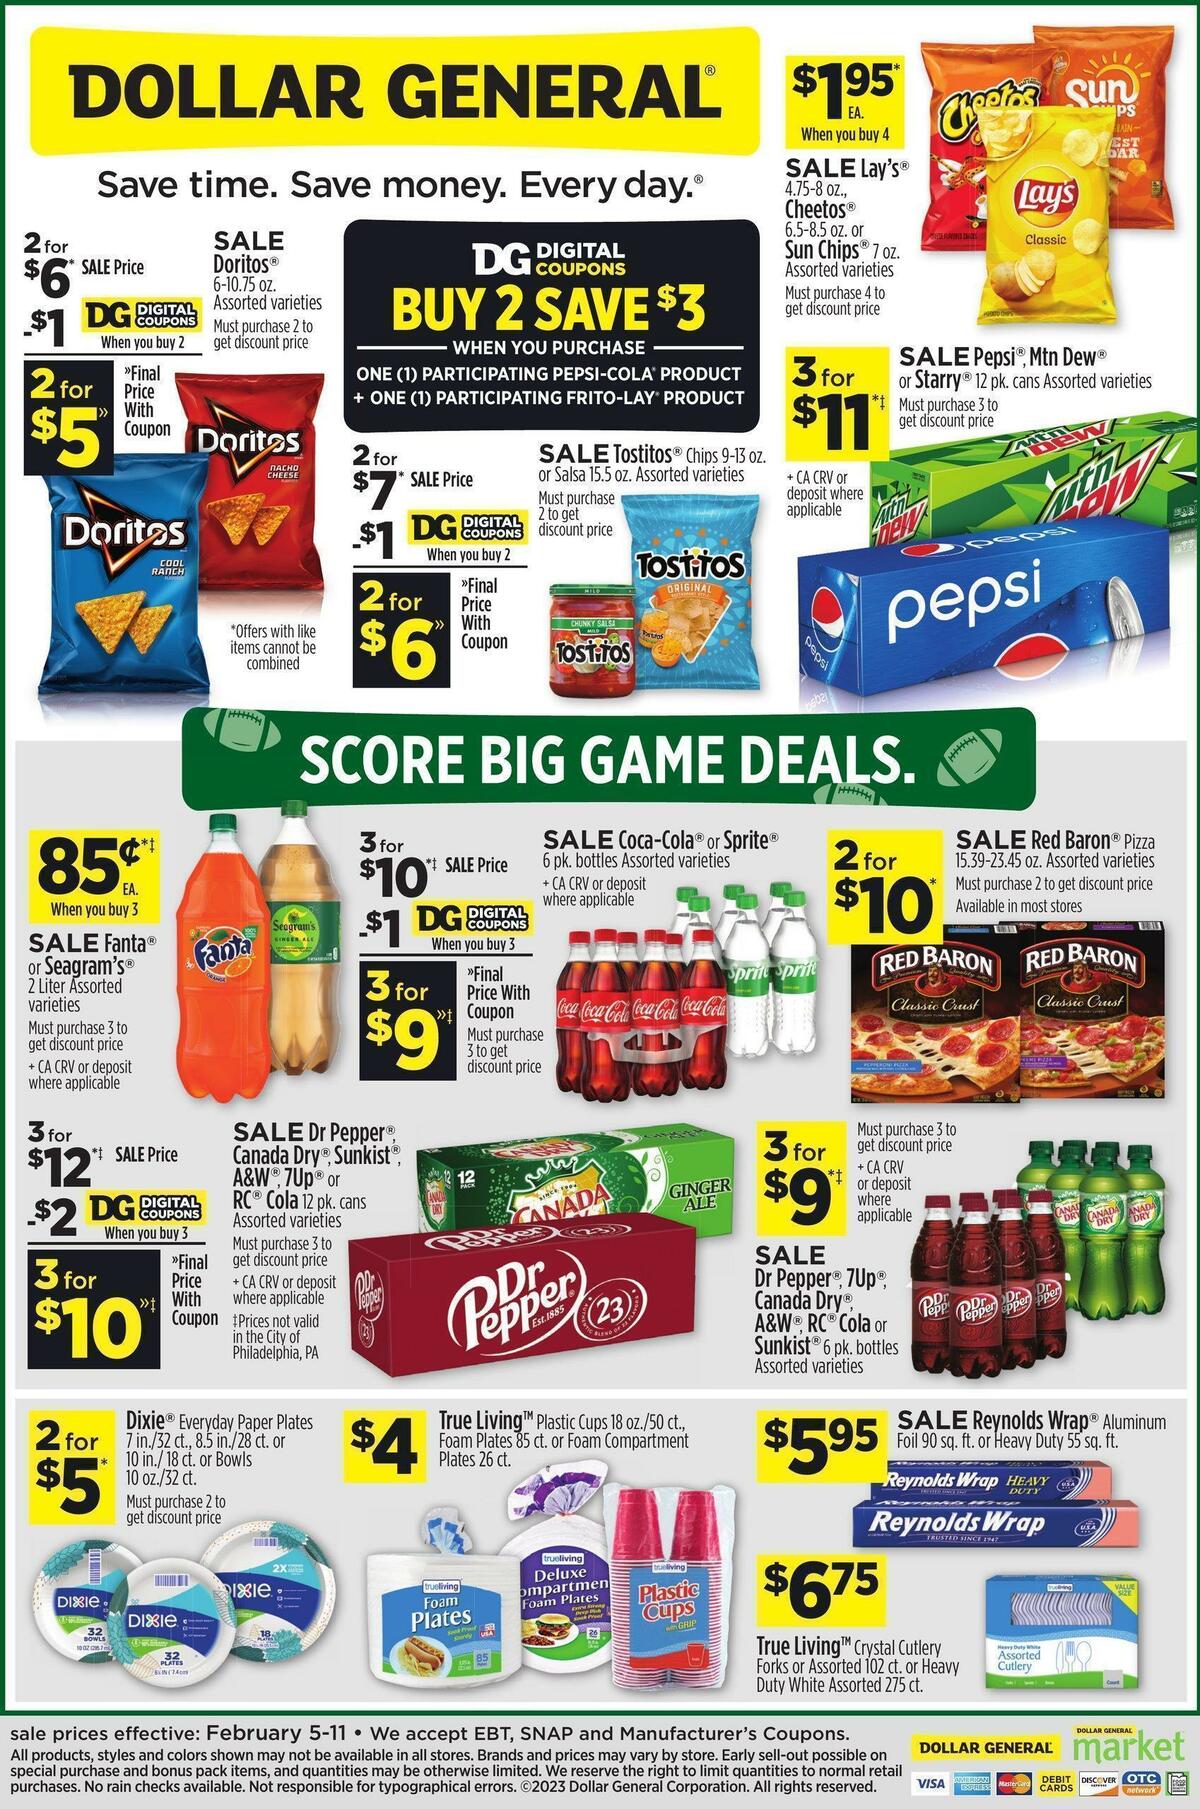 Dollar General Score Big Game Deals Weekly Ad from February 5